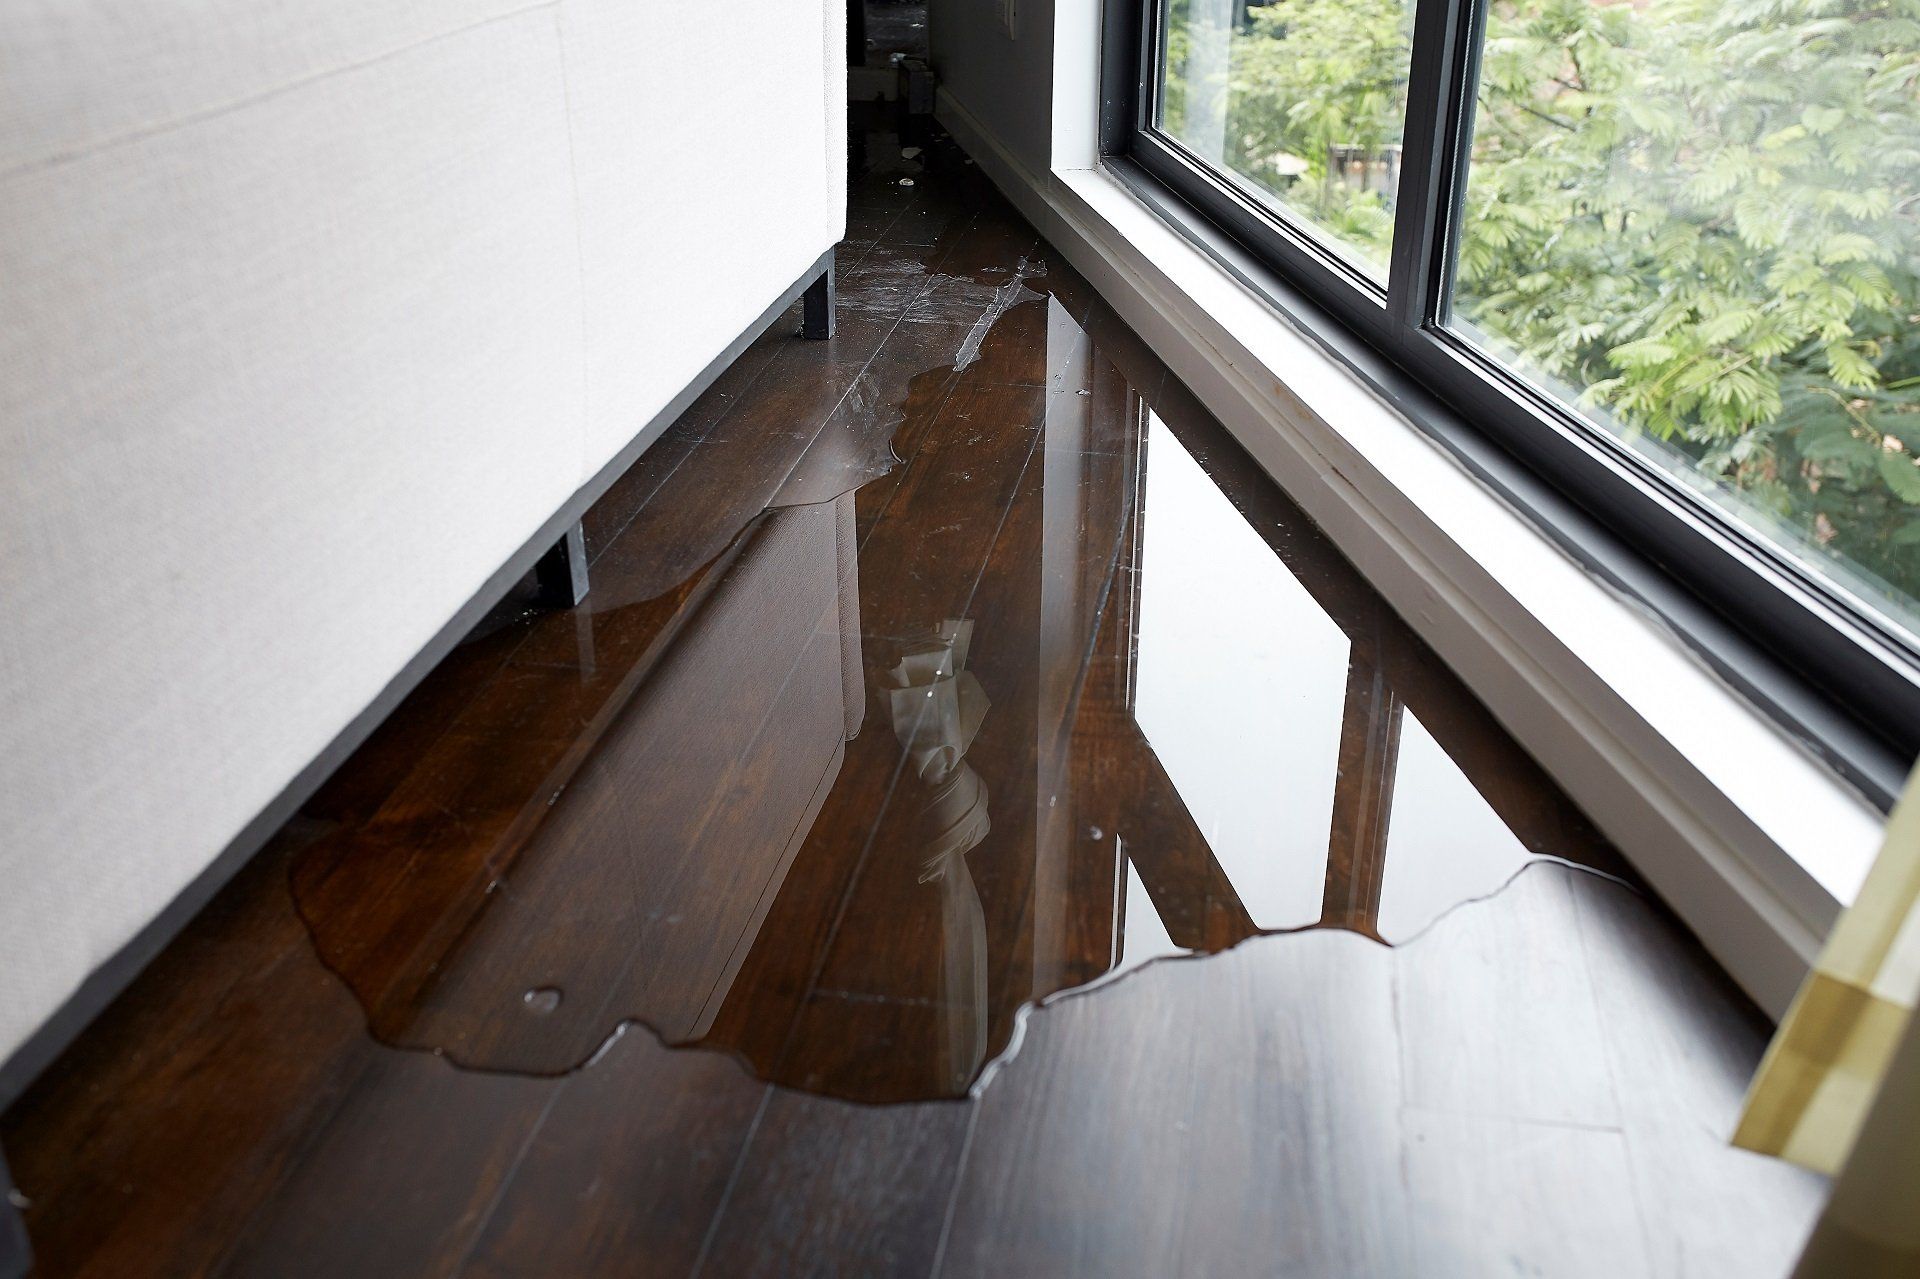 When To Make A Water Leak Homeowners Insurance Claim?